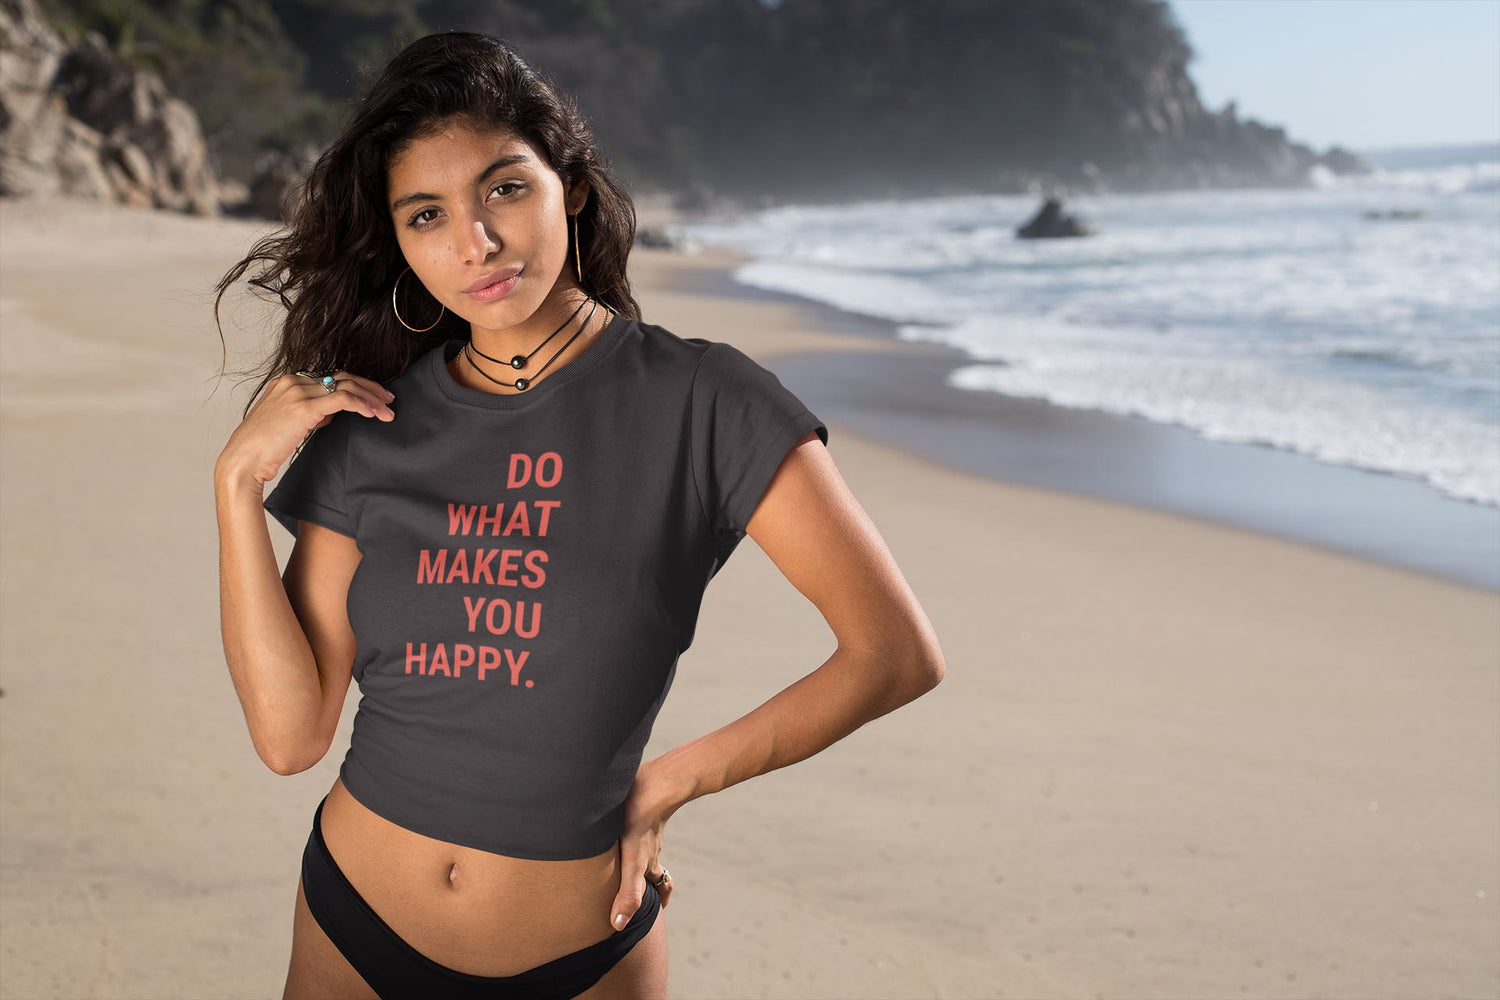 Novelty T-Shirts | Cultureopolis | If you love t-shirts, you'll love our store. See every t-shirt style imaginable, with exclusive designs, prints, and embroideries exclusively available at Cultureopolis.